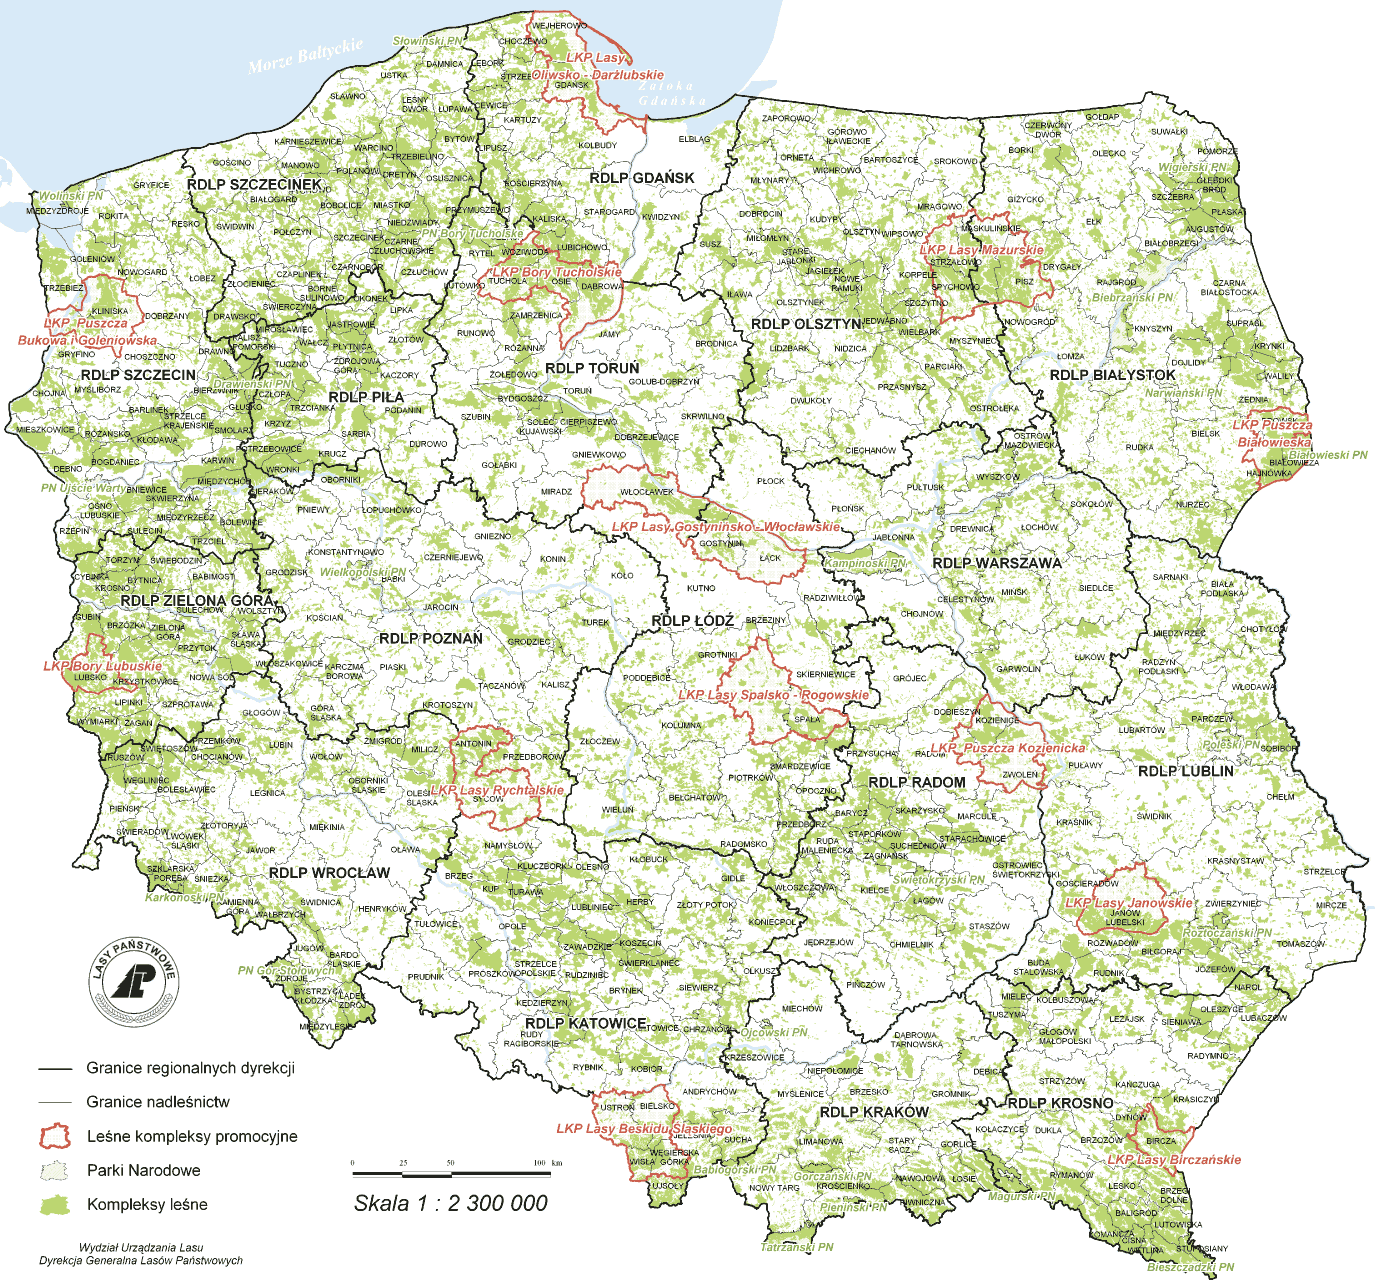 LAS W POLSCE Forests in Poland